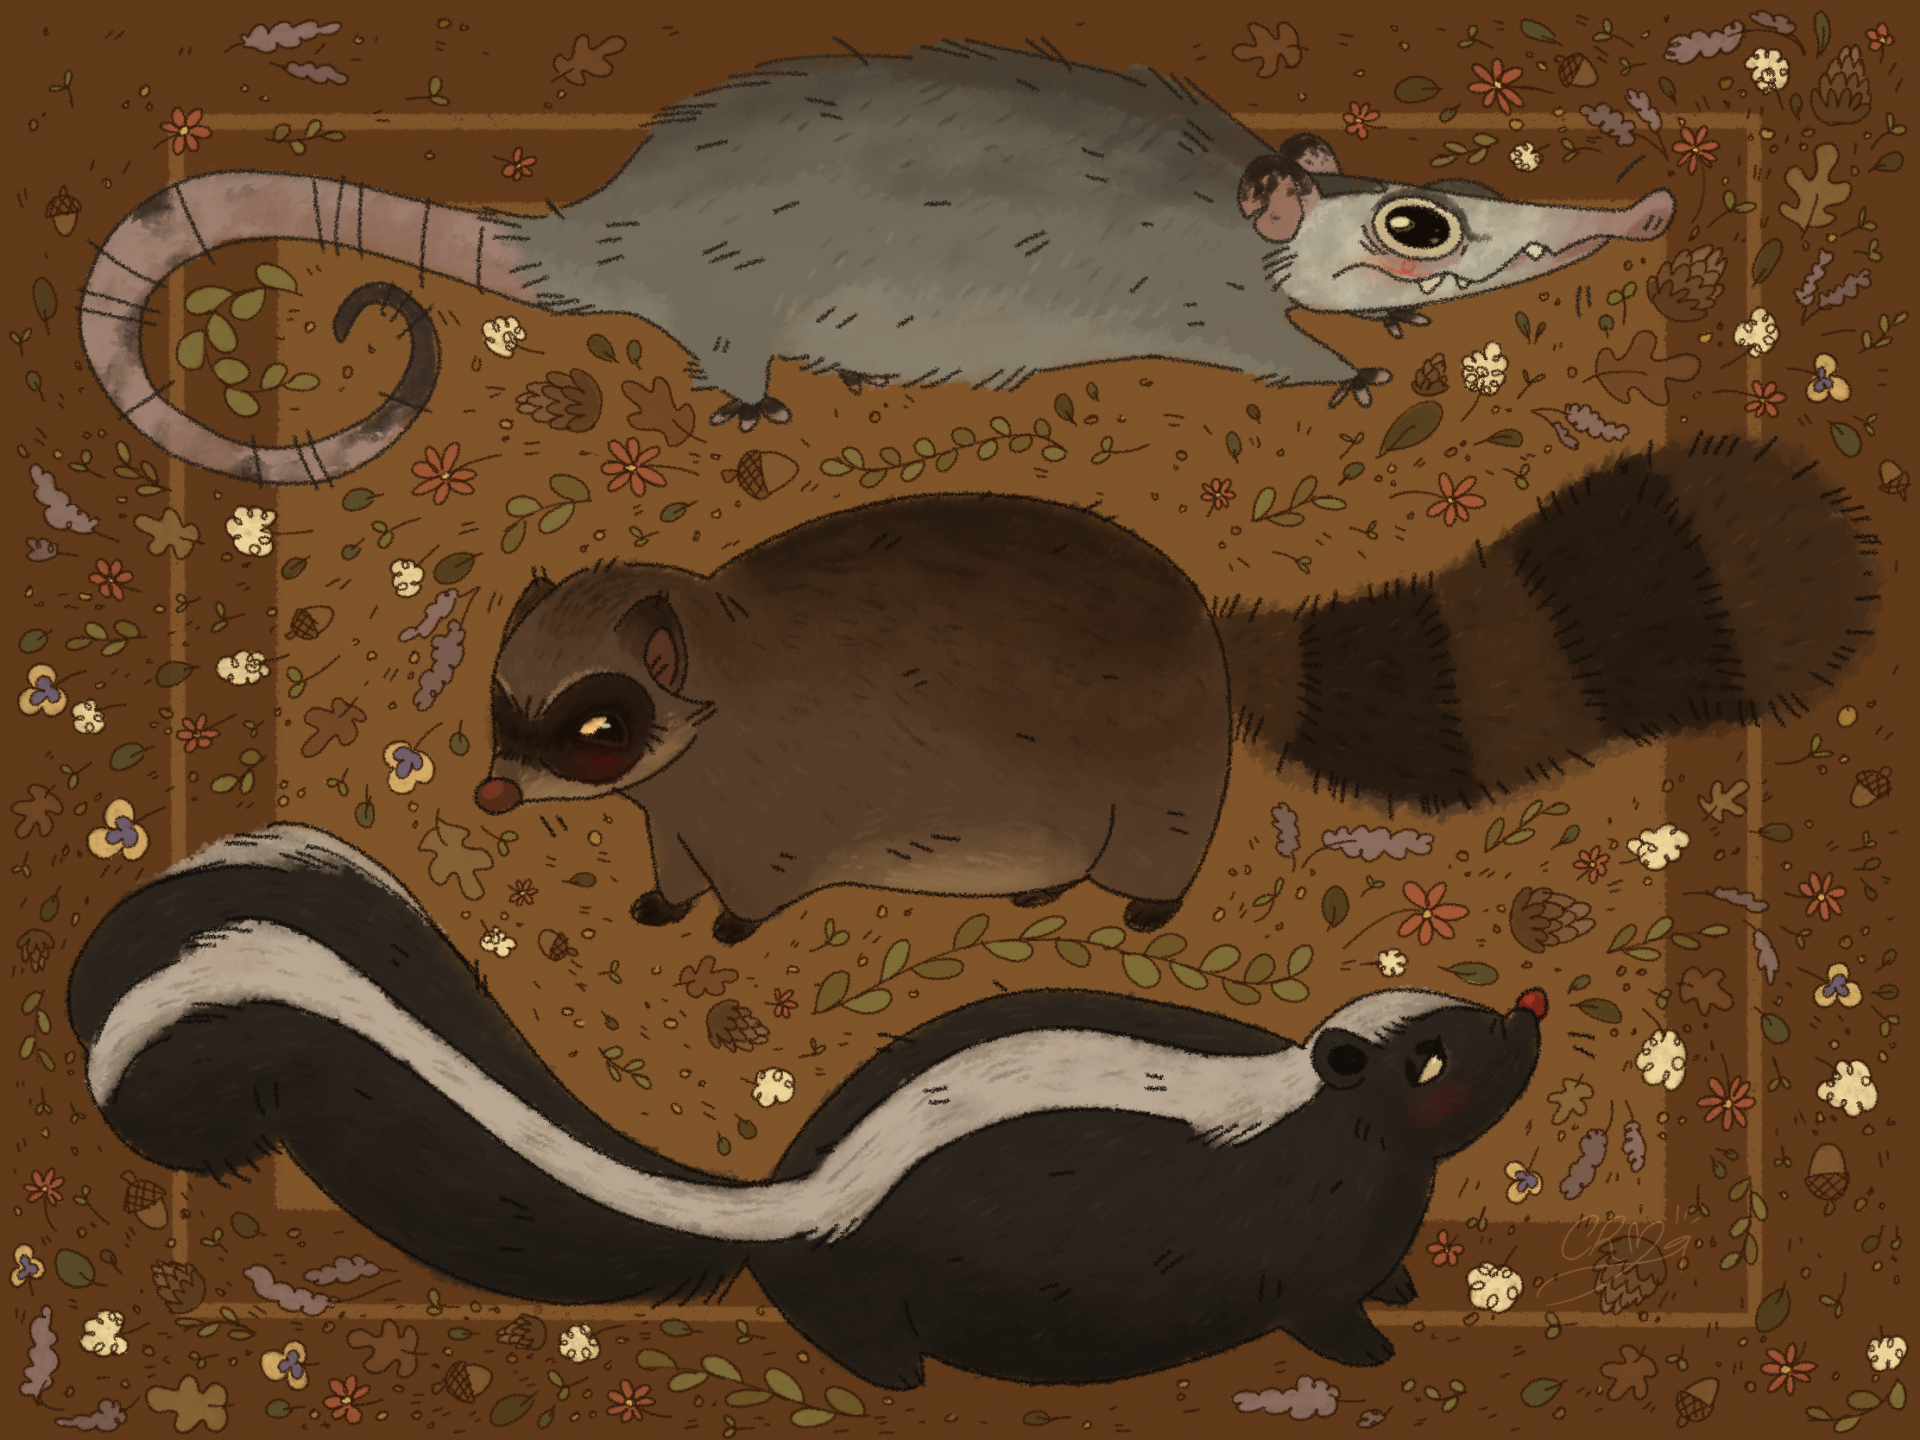 Under-appreciated Critters (Opossum, Raccoon and a Skunk).